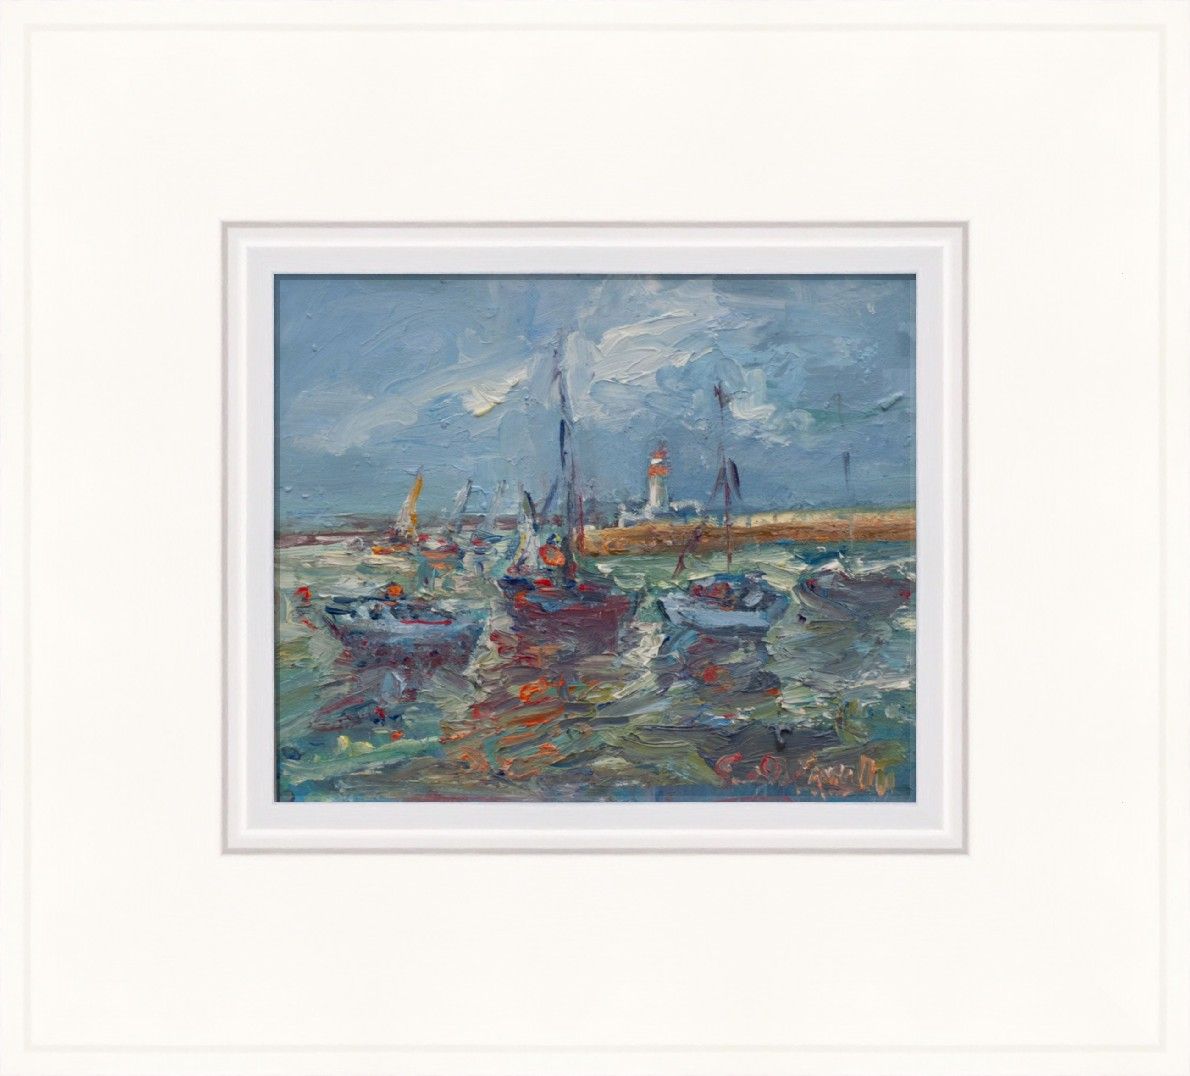 Sailboats, Dun Laoghaire by Clare O'Farrell